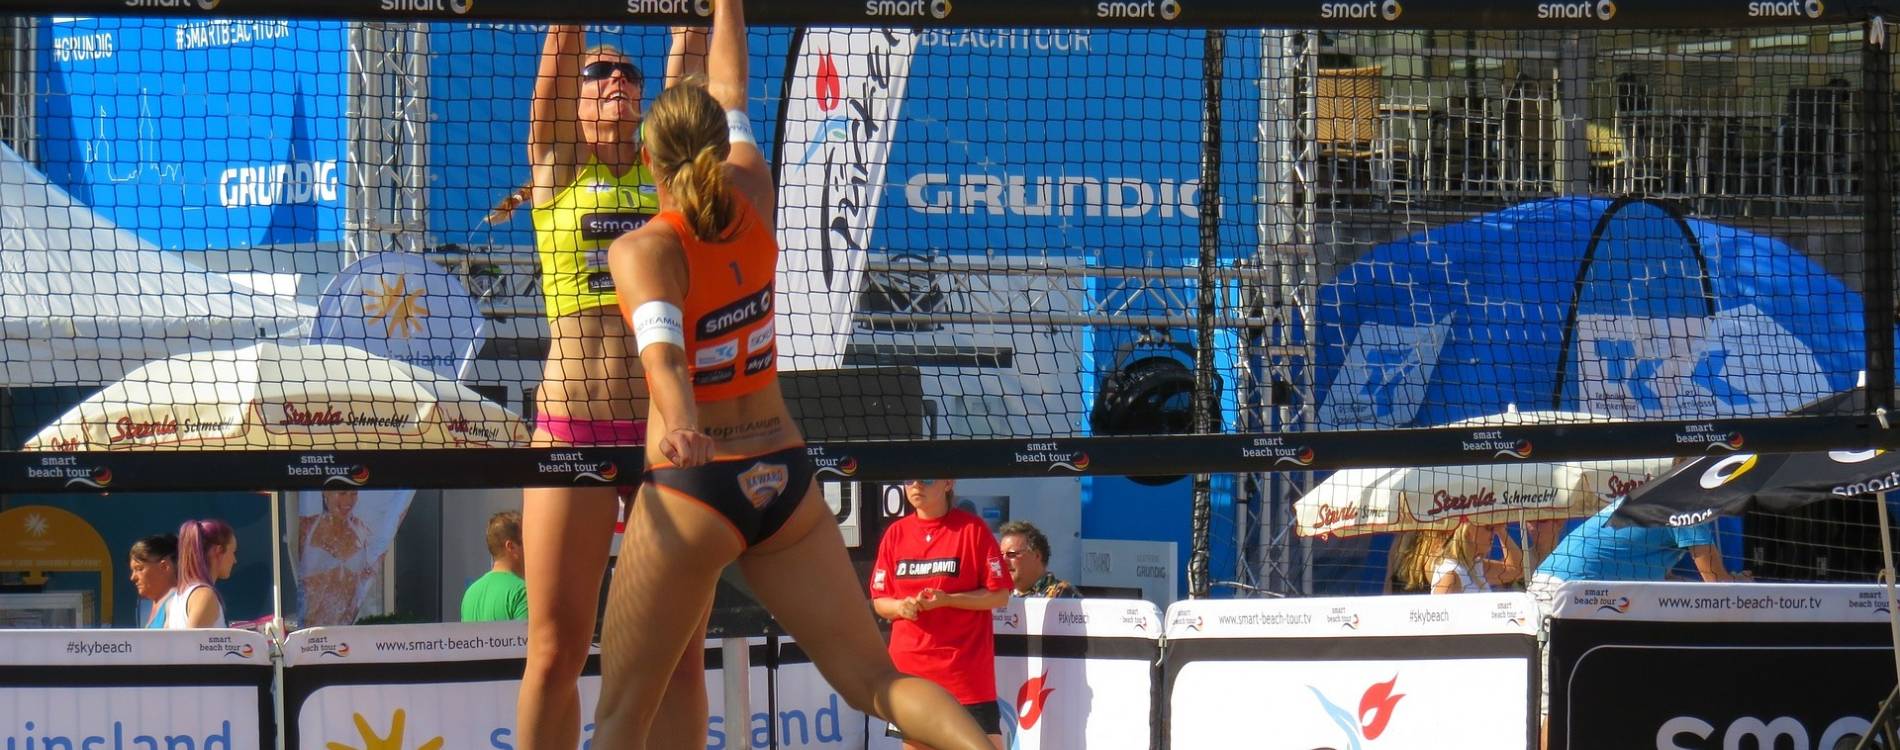 Beach volleyball players jump for the ball